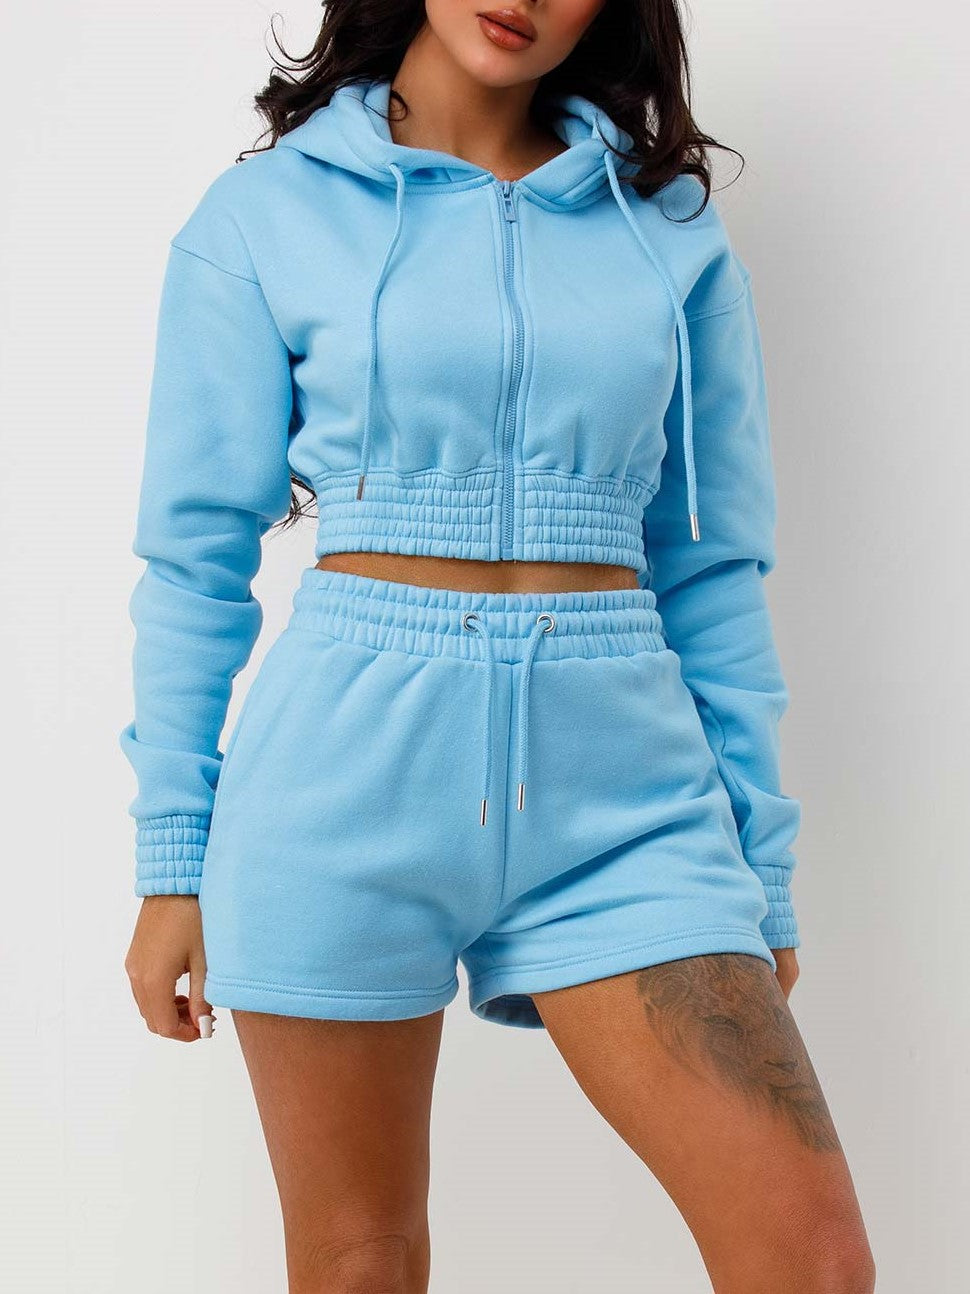 Blue Cropped Zip Up Hoodie & Shorts Loungewear Co-ord